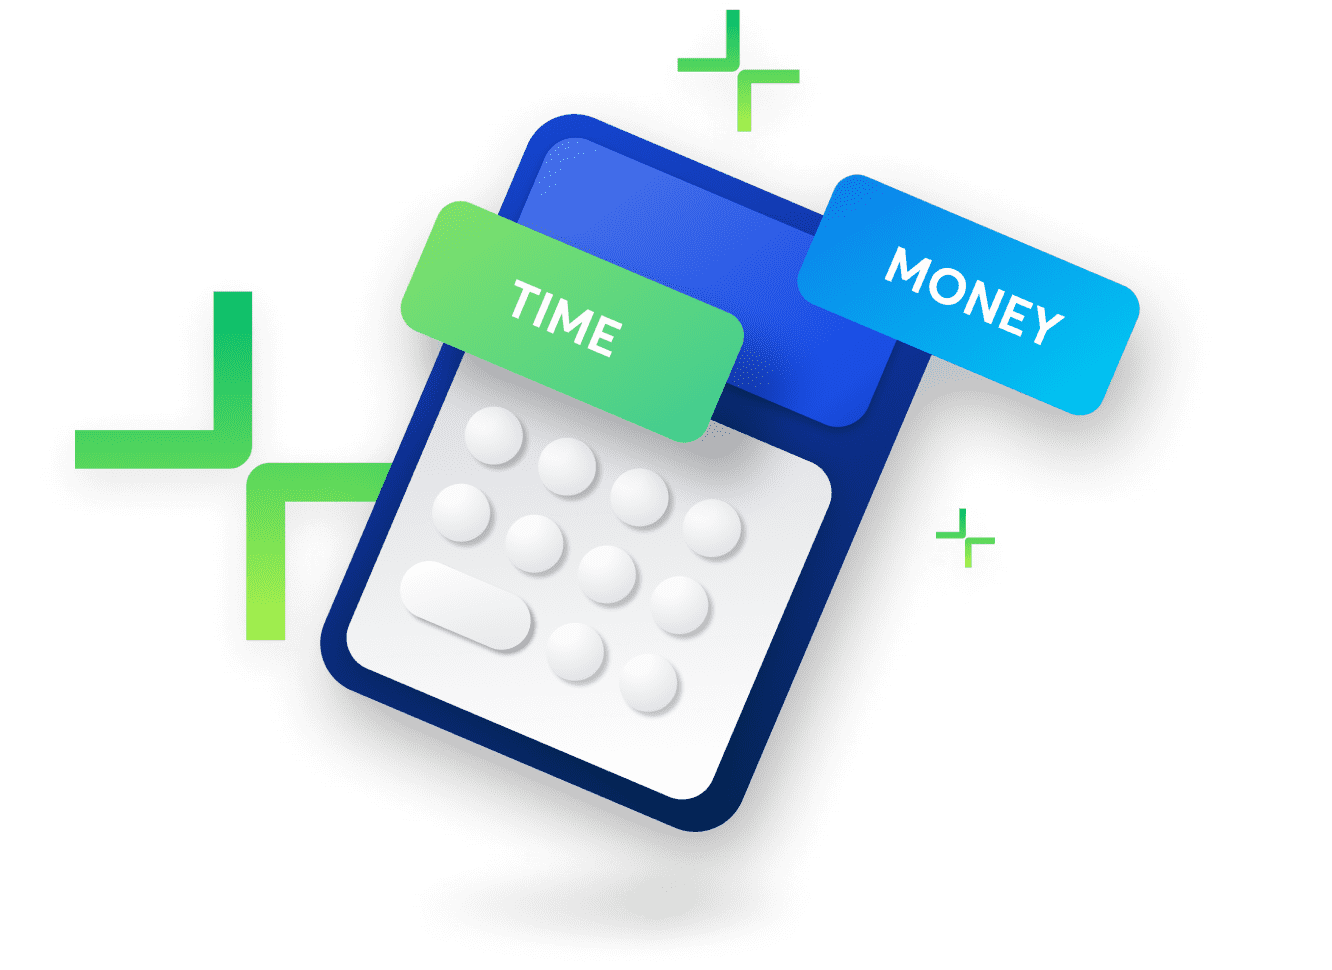 How much time and money could you save?